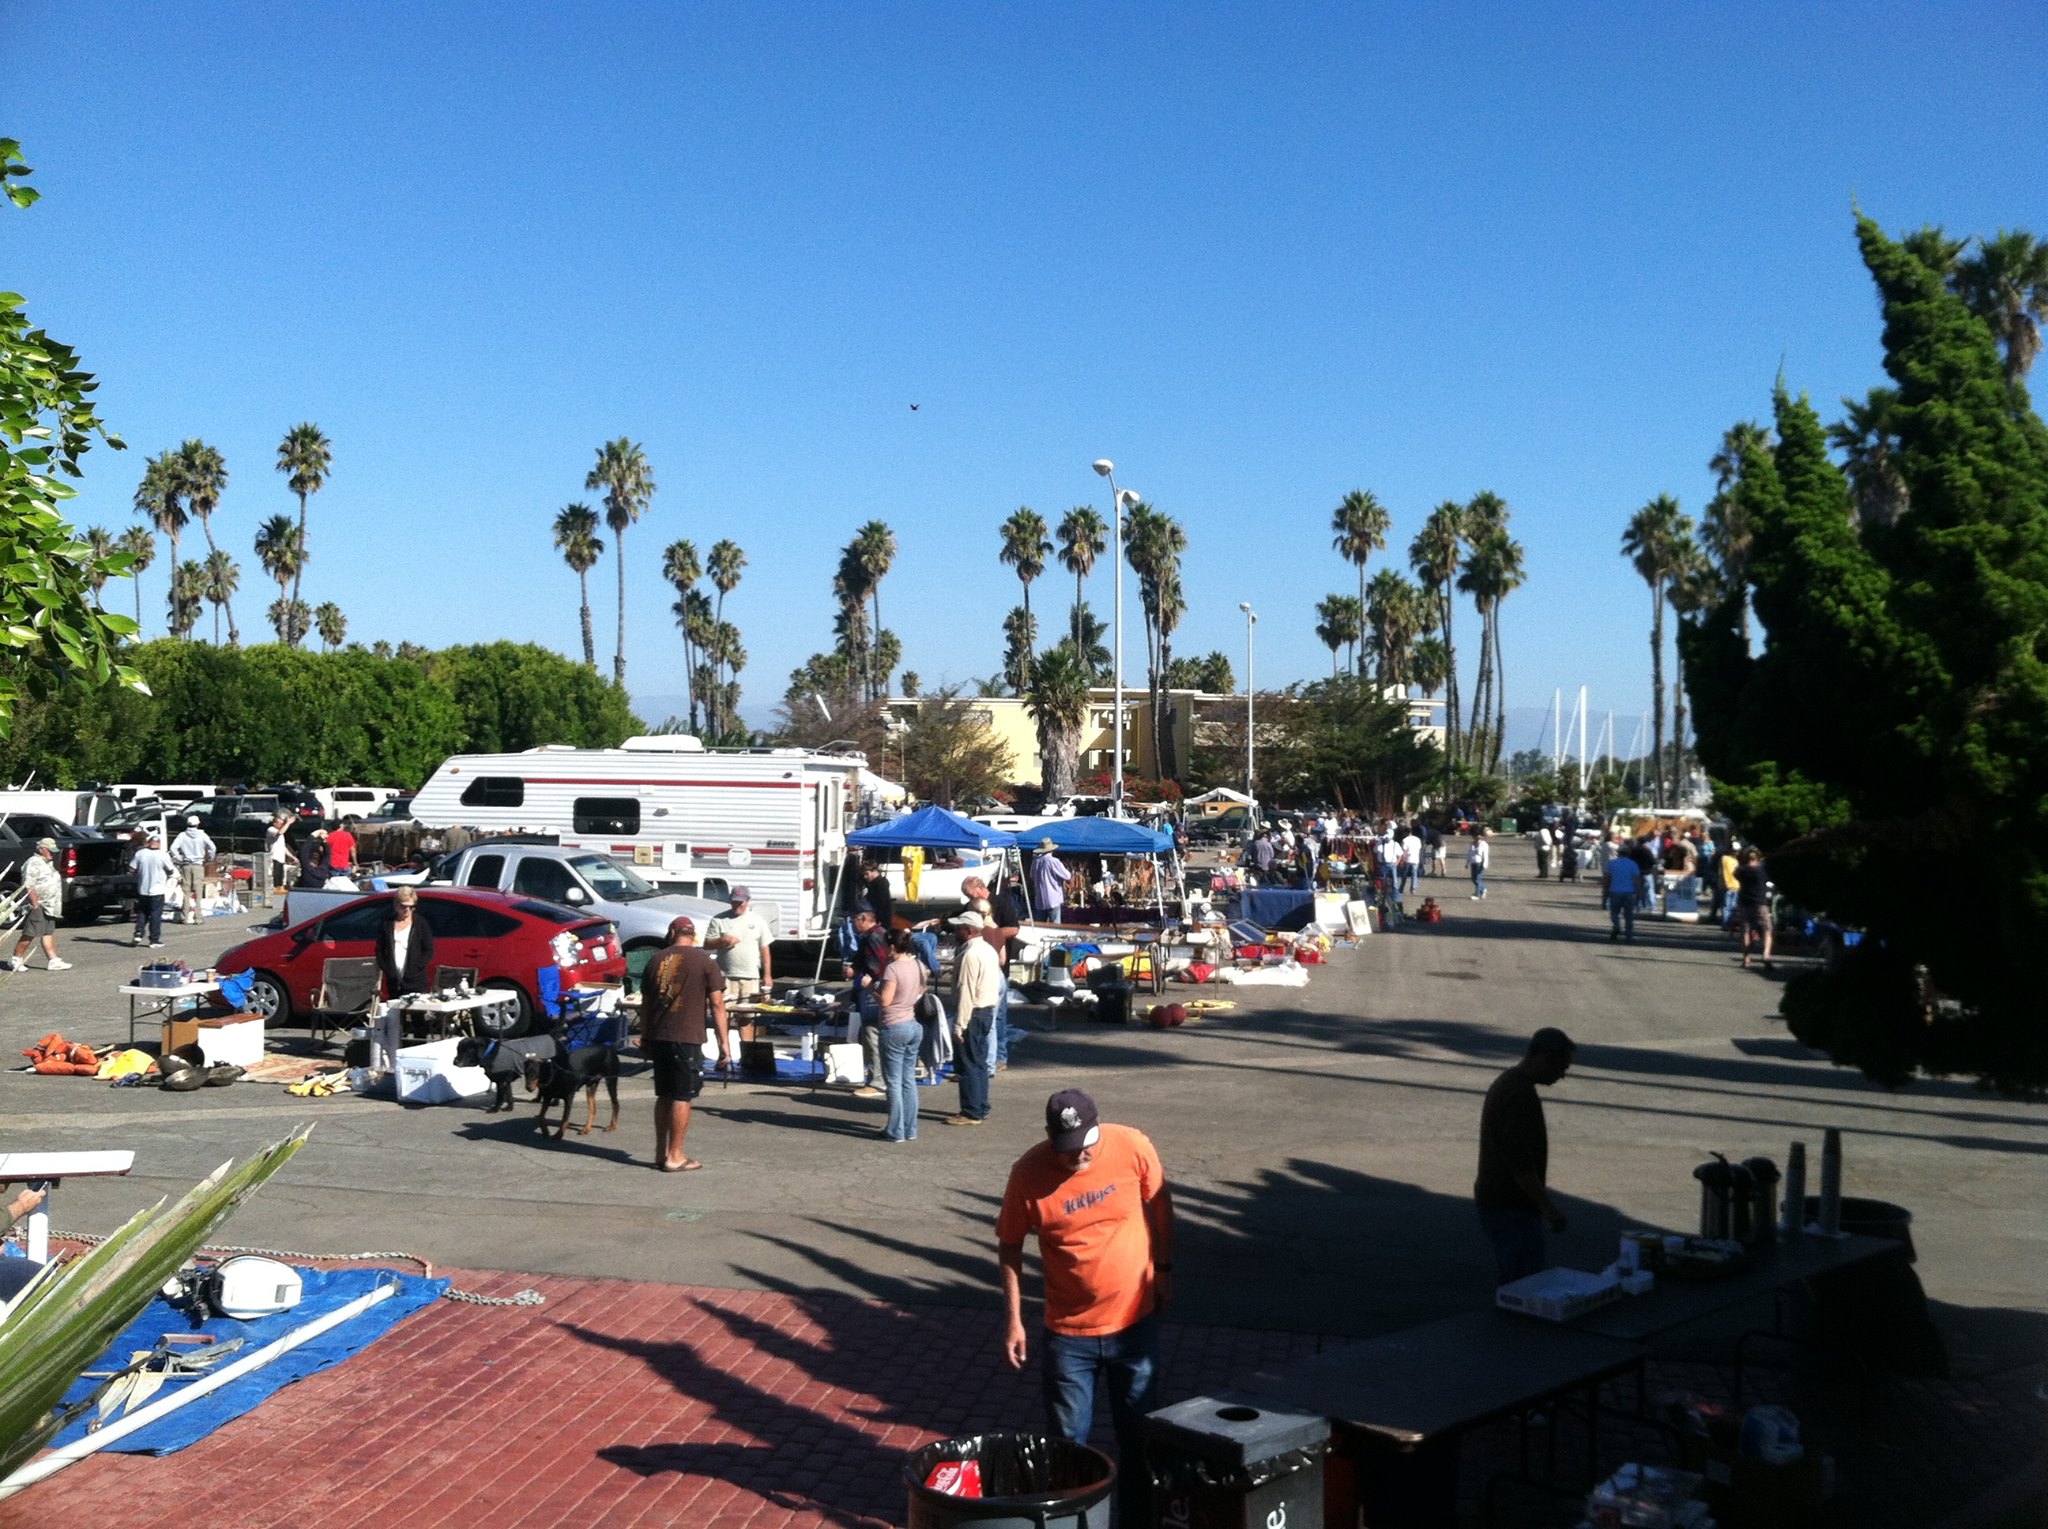 Early morning at the Boater's Swap Meet